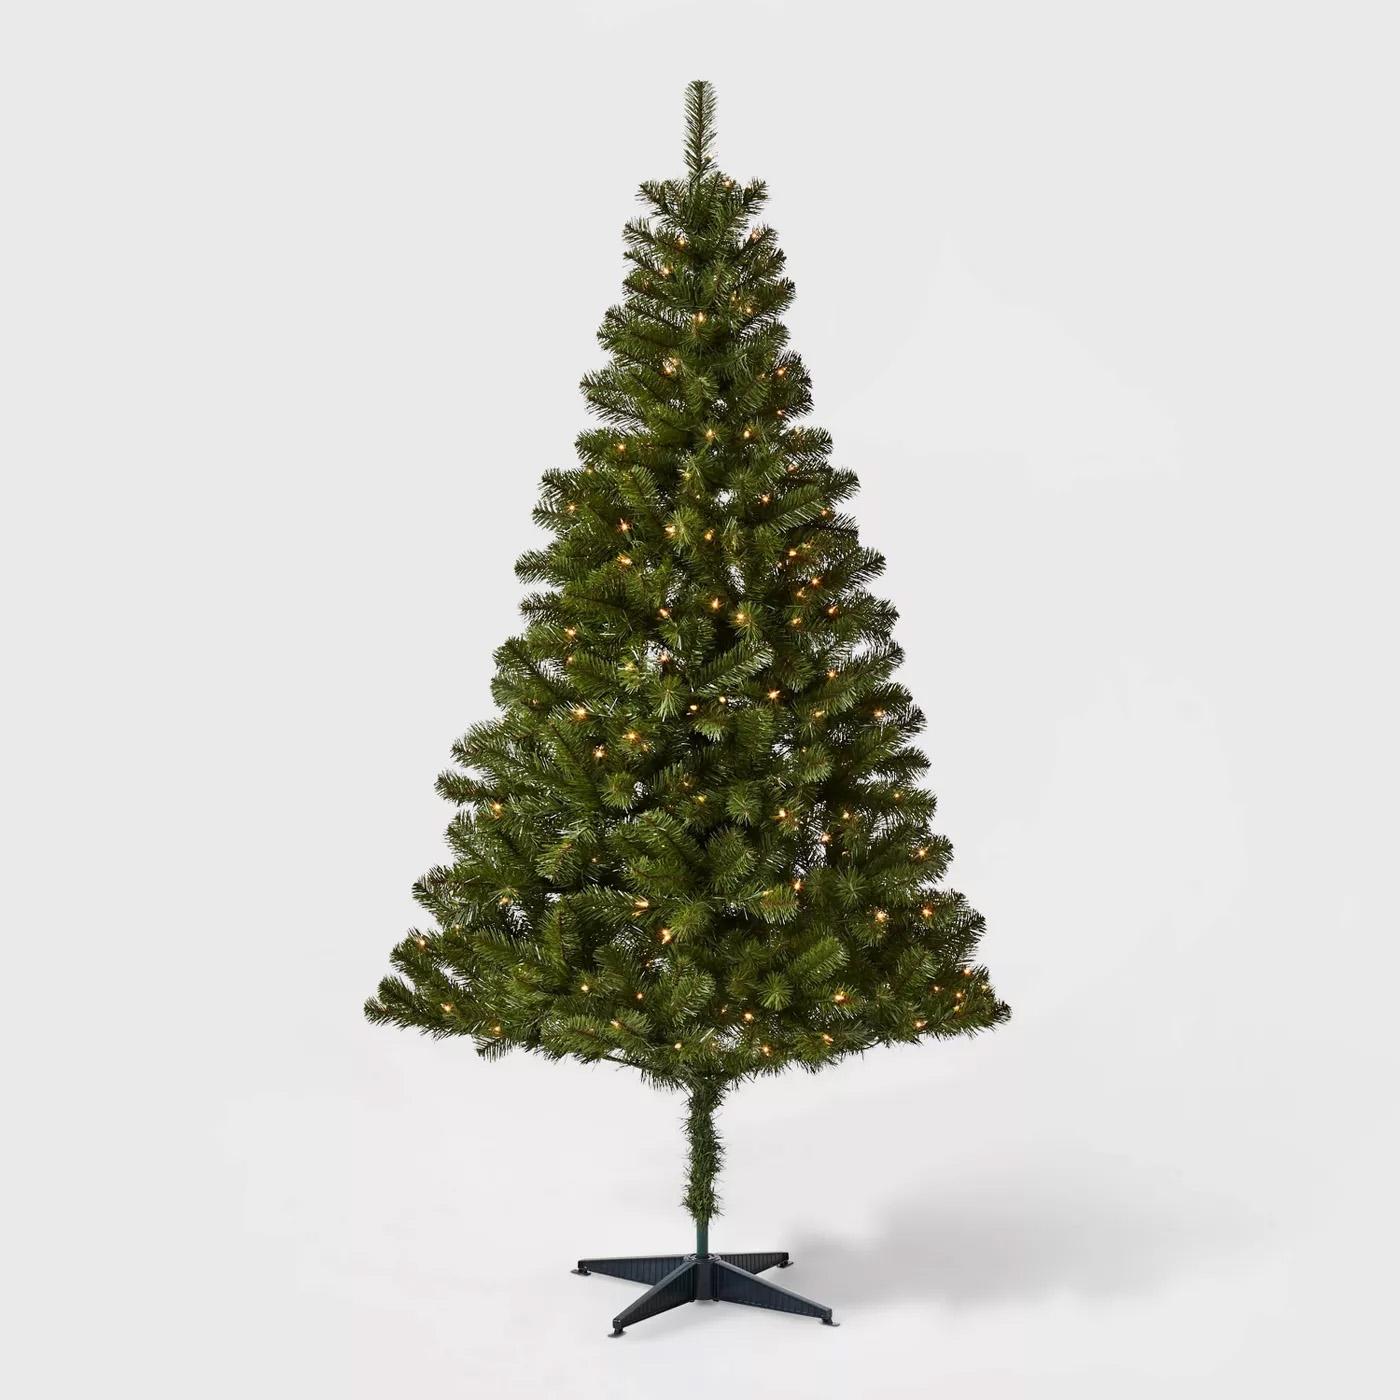 6ft Pre-lit Alberta Spruce Artificial Christmas Tree for $30